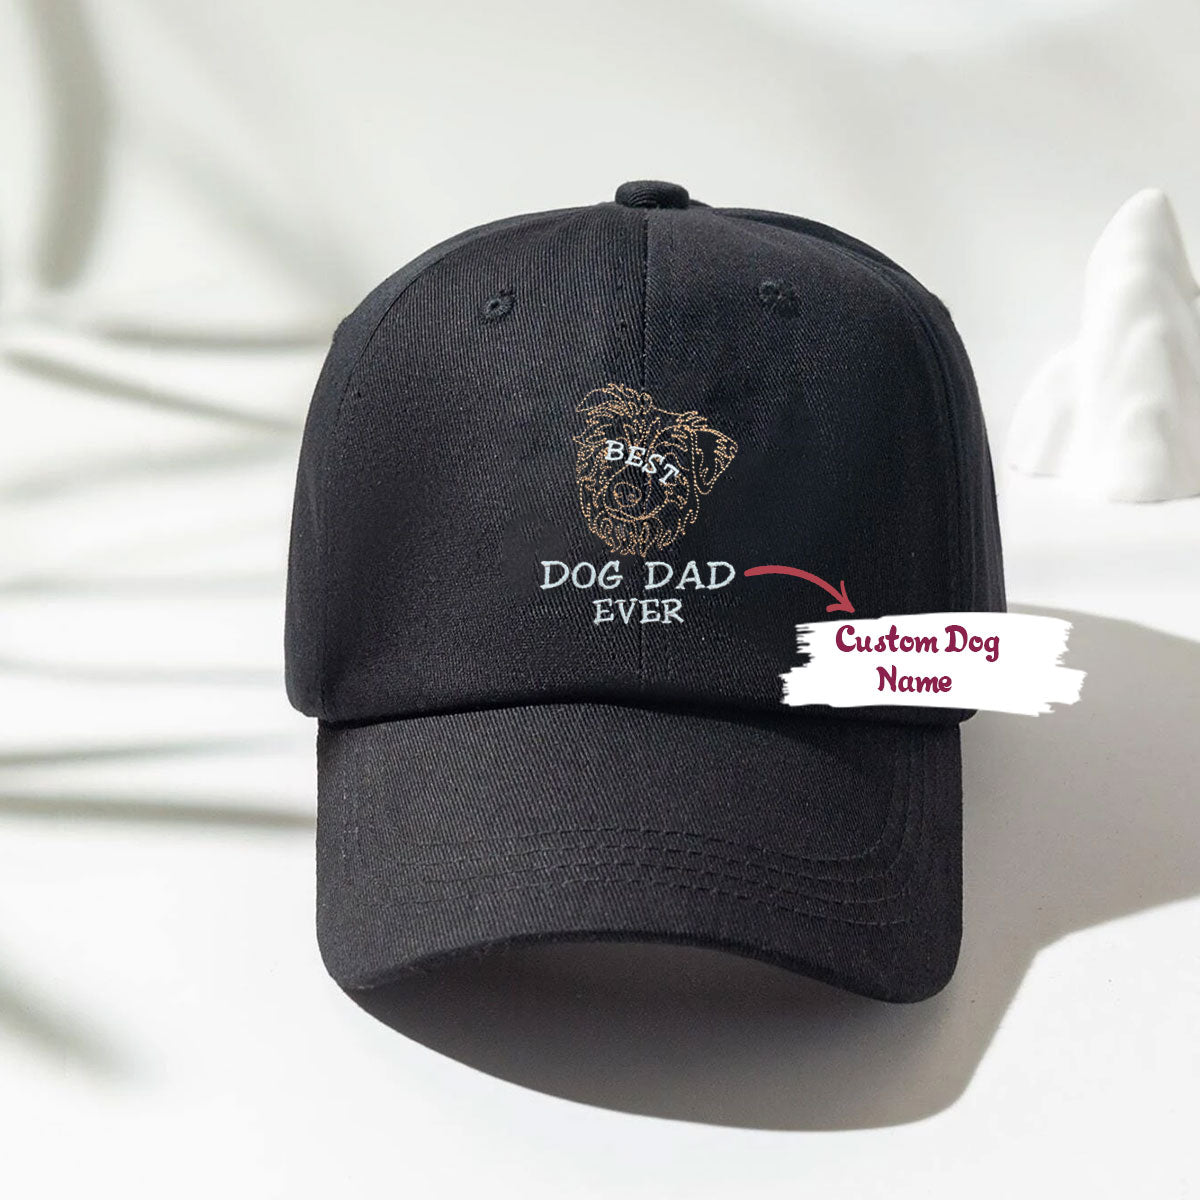 Personalized Best Australian Shepherd Dog Dad Ever Embroidered Hat, Custom Hat with Dog Name